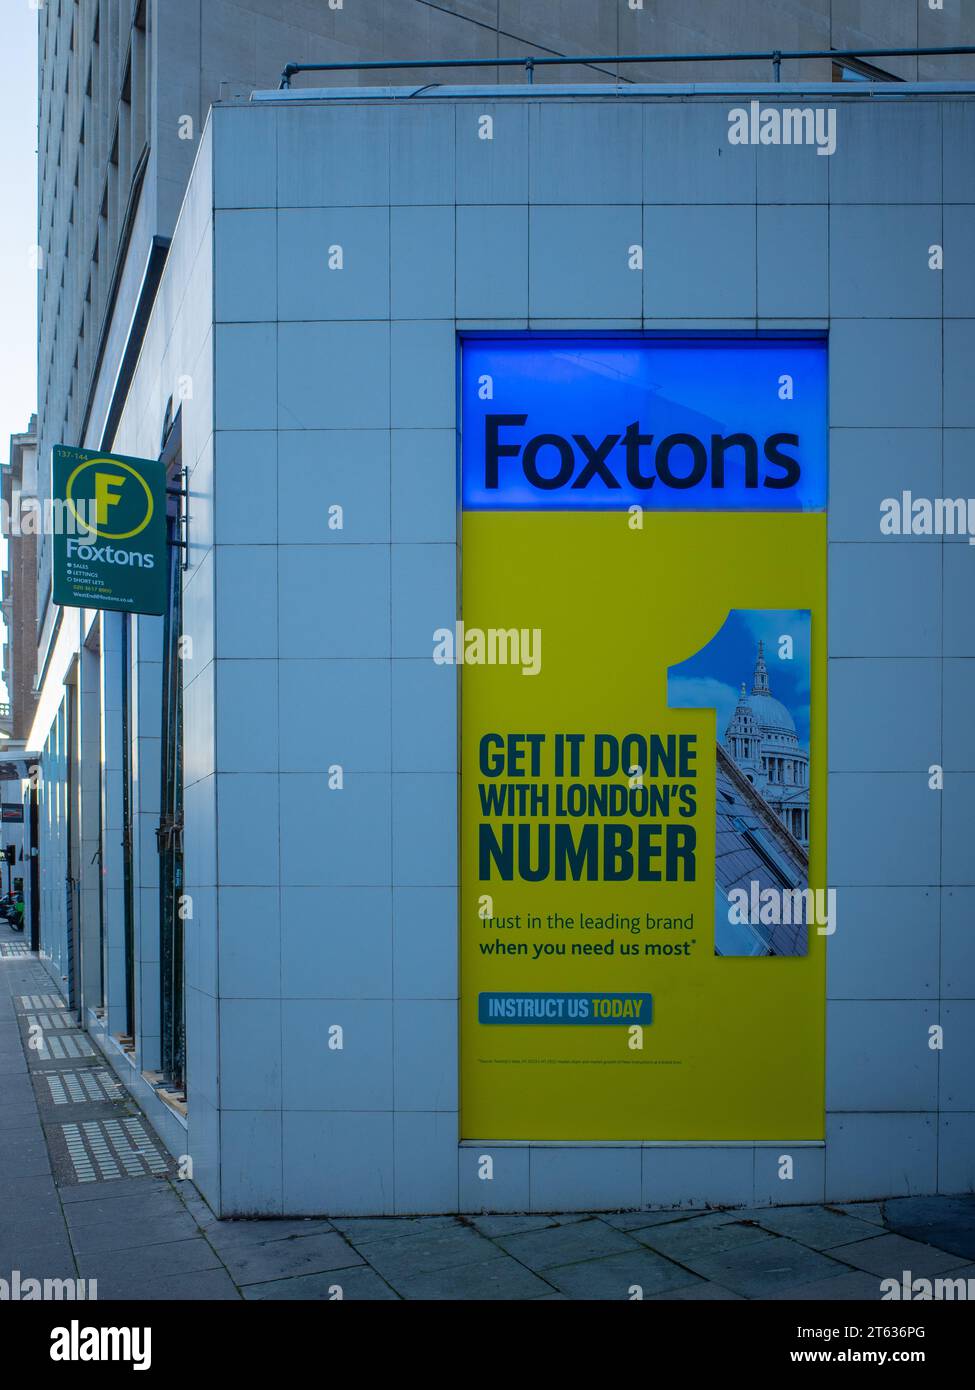 Foxtons London - Foxtons Estate Agency Offices on High Holborn in Central London. Foxtons Group plc. Founded 1981. Stock Photo